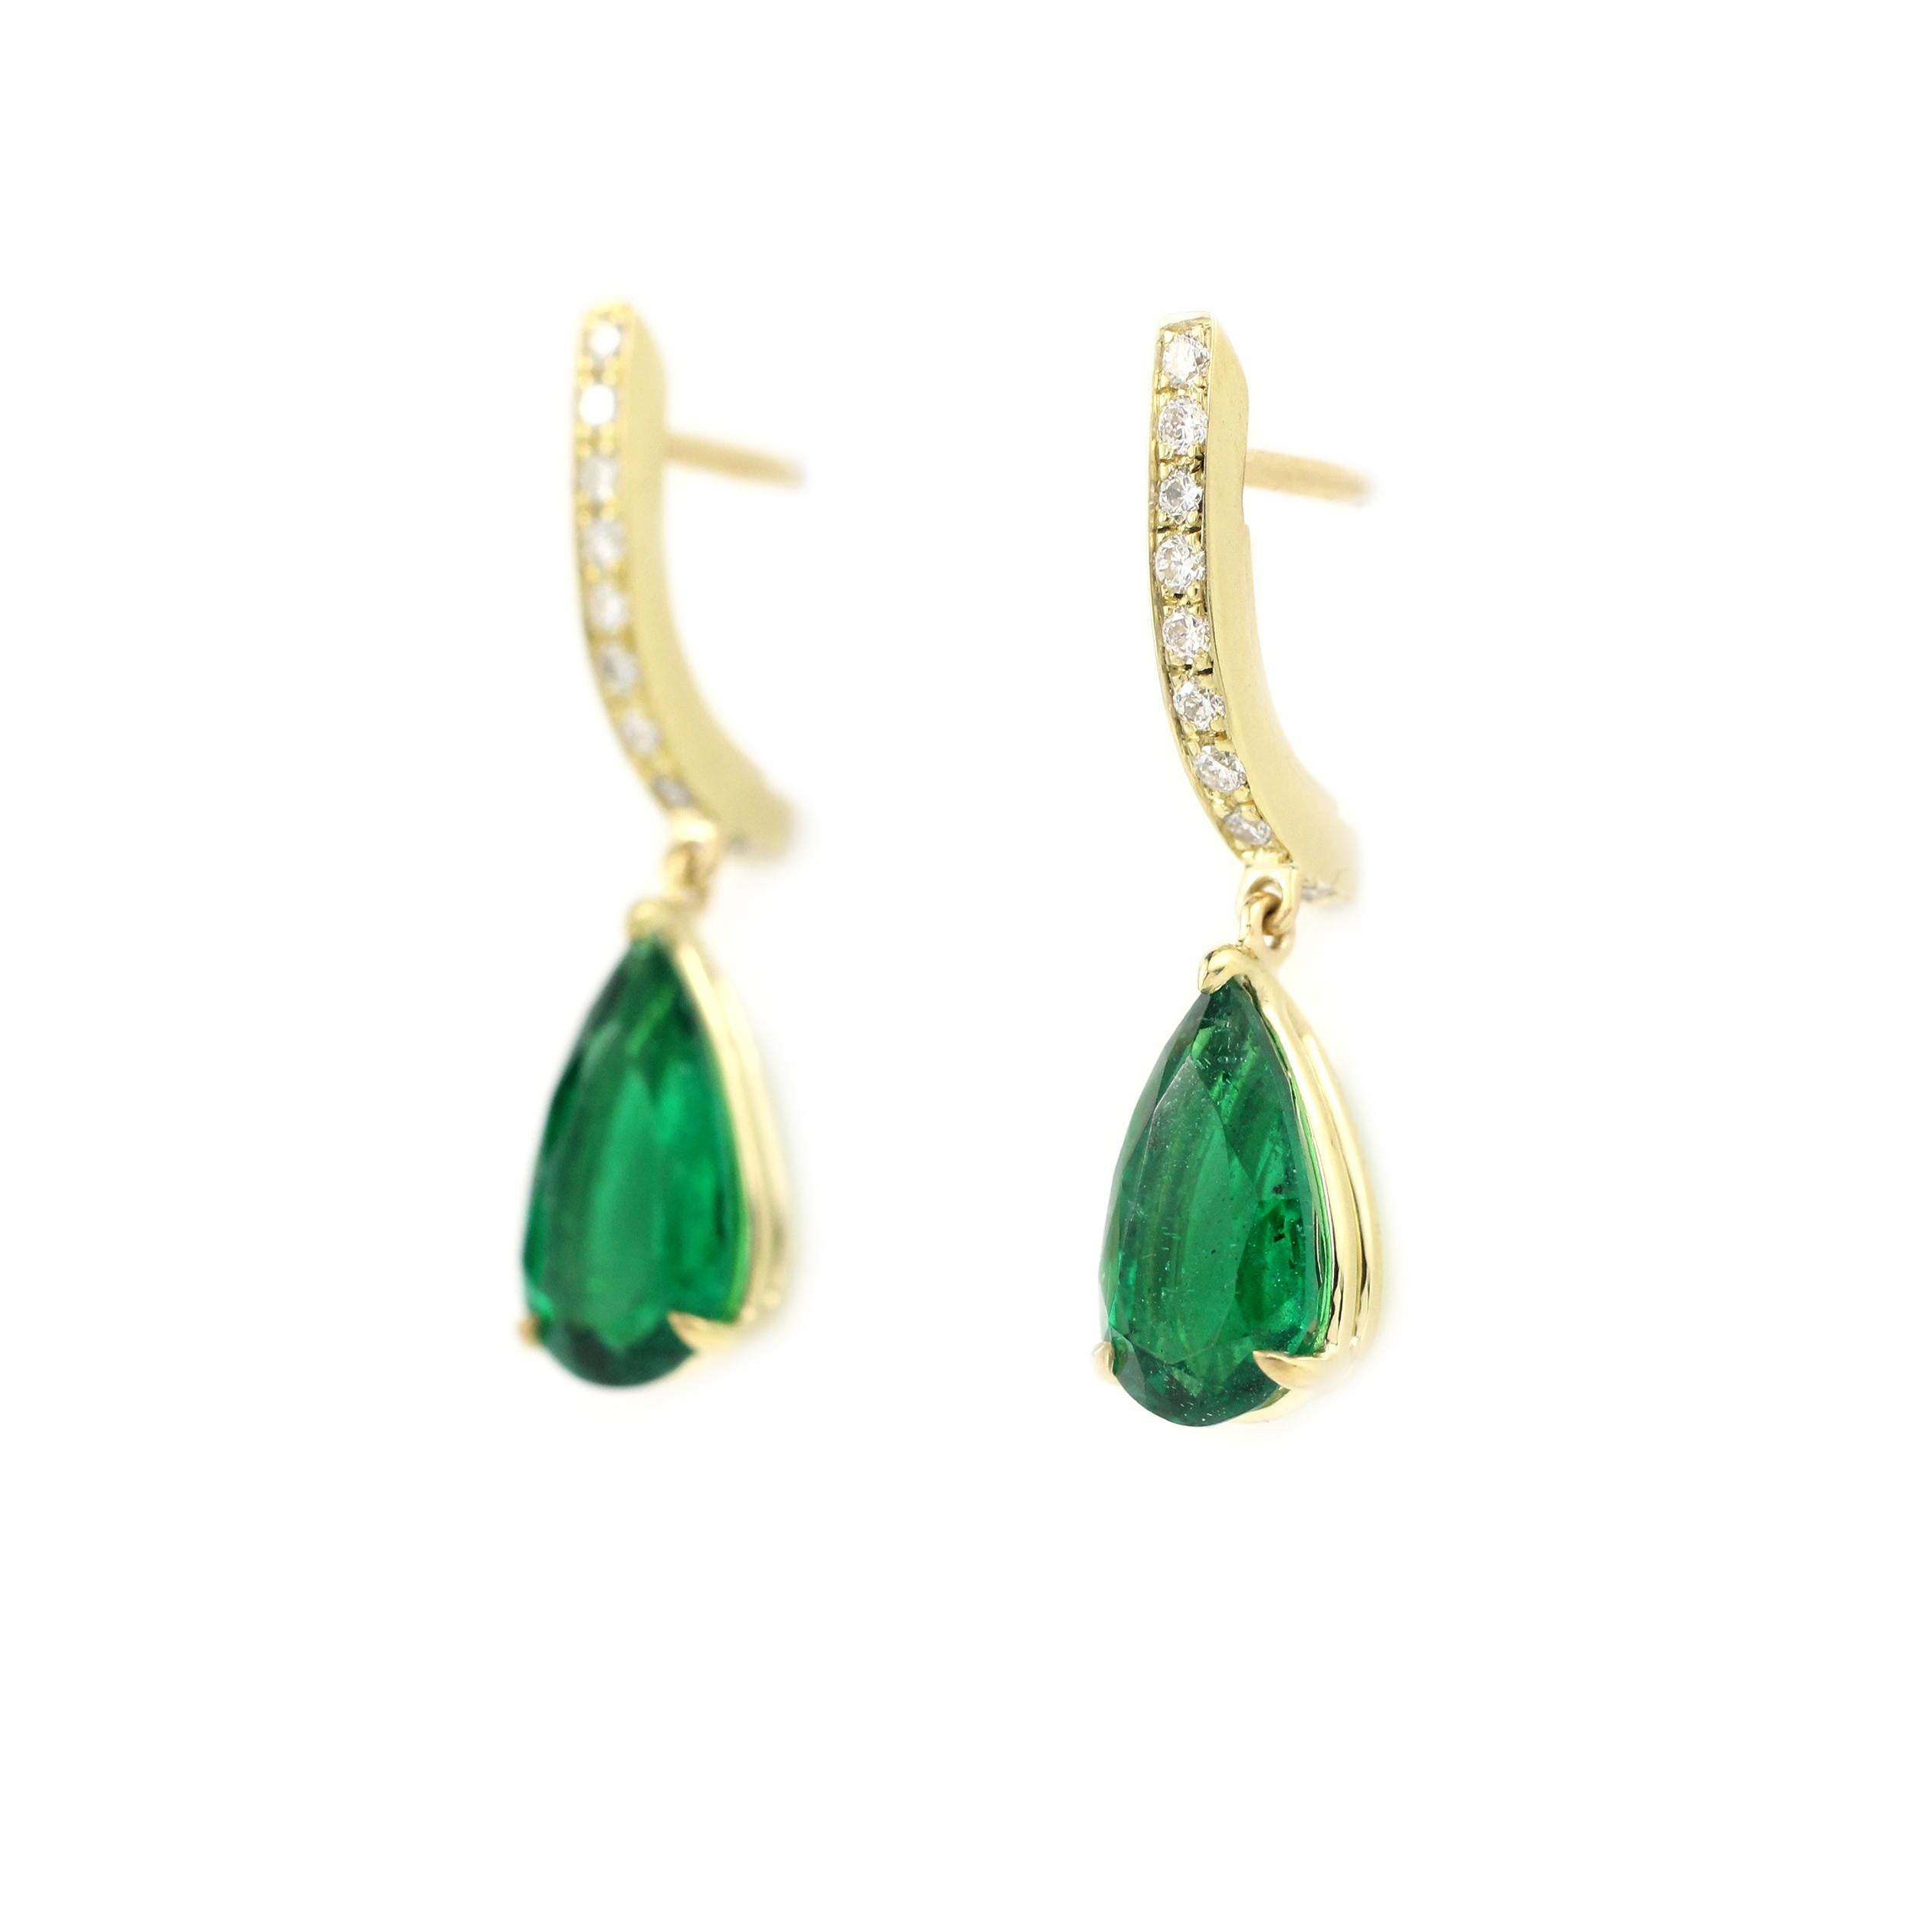 This fine pair contains two GIA Certified Pear-Shape Natural Emeralds at 1.20 Cts. and 1.11 Cts. A well-matched pair of beautiful Zambian stones of deep green color.    18 Kt Yellow Gold and Diamond pave tops with post-backs.  

This is an